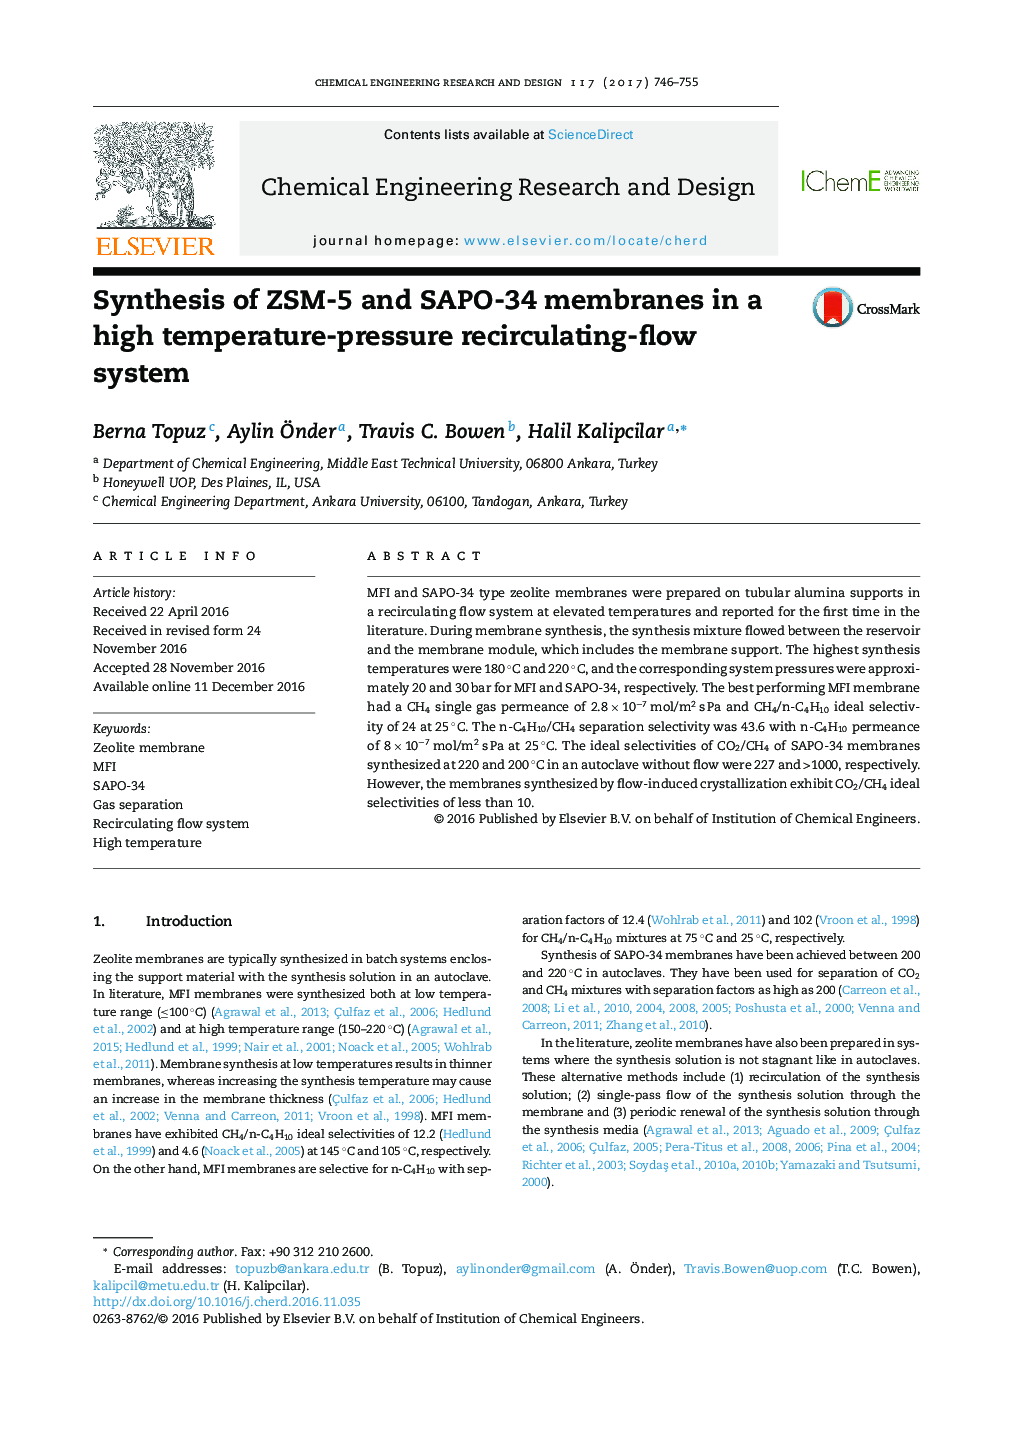 Synthesis of ZSM-5 and SAPO-34 membranes in a high temperature-pressure recirculating-flow system